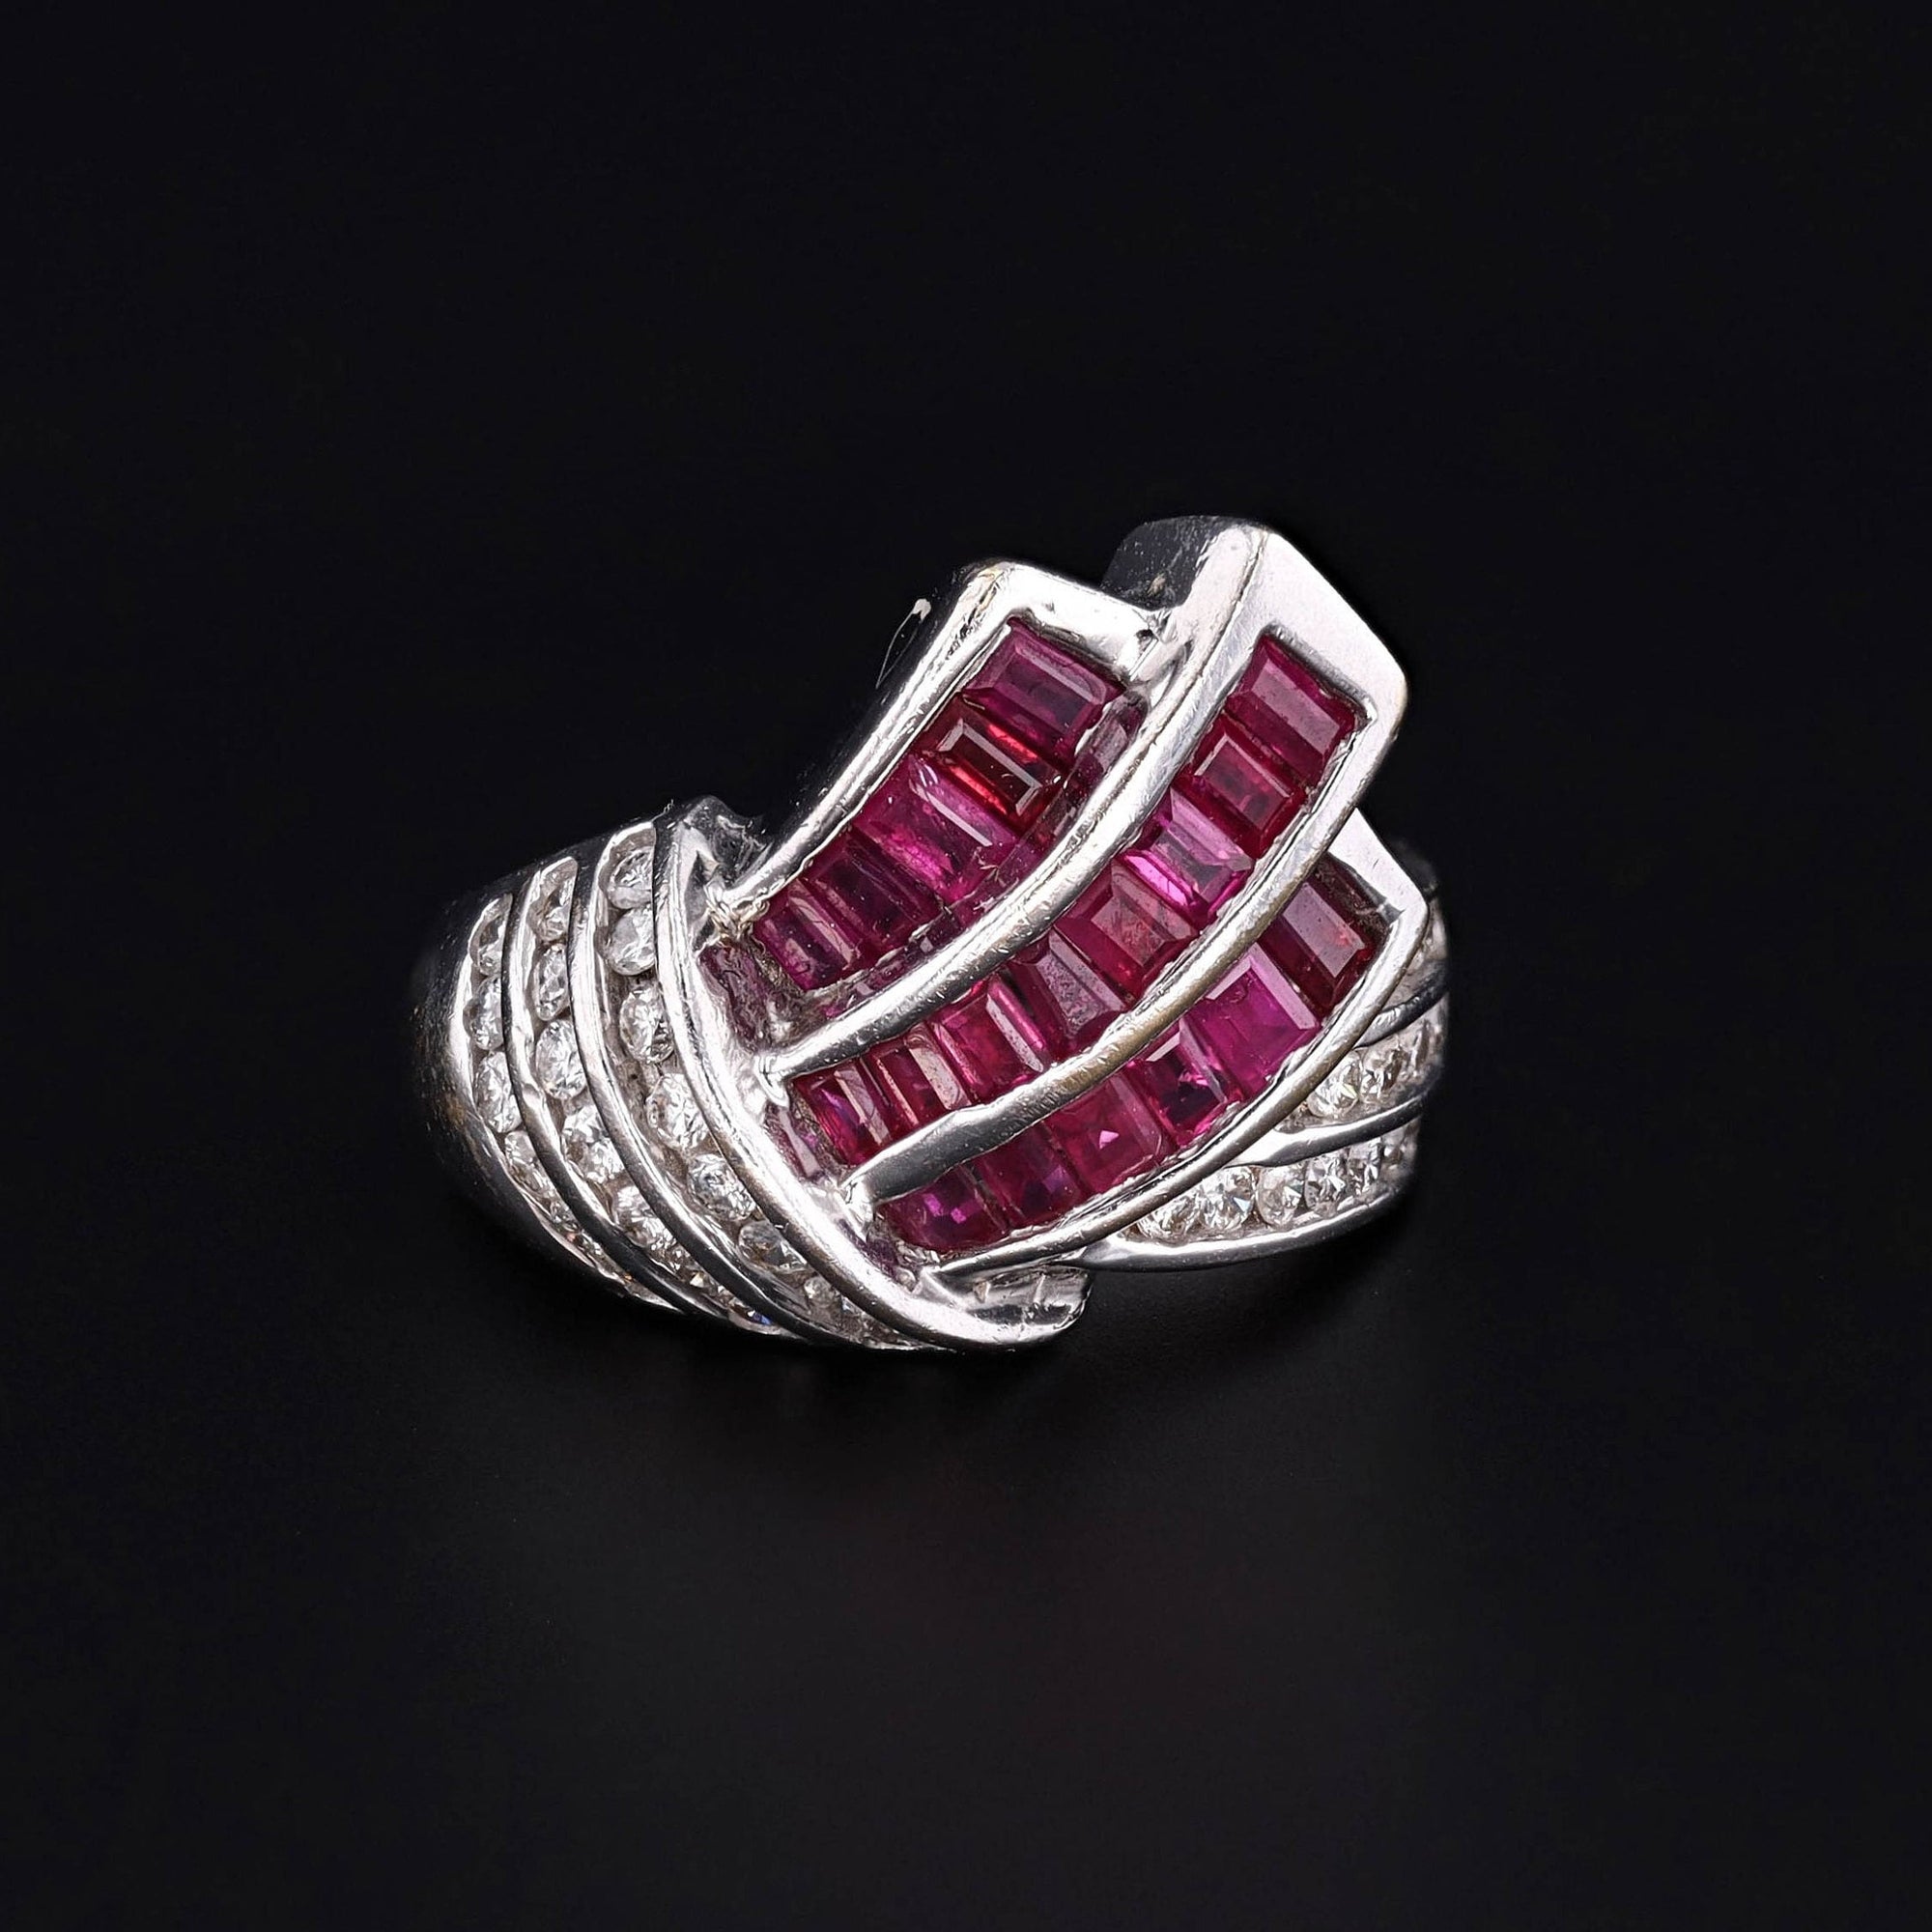 Vintage Ruby and Diamond Ring of 14k White Gold